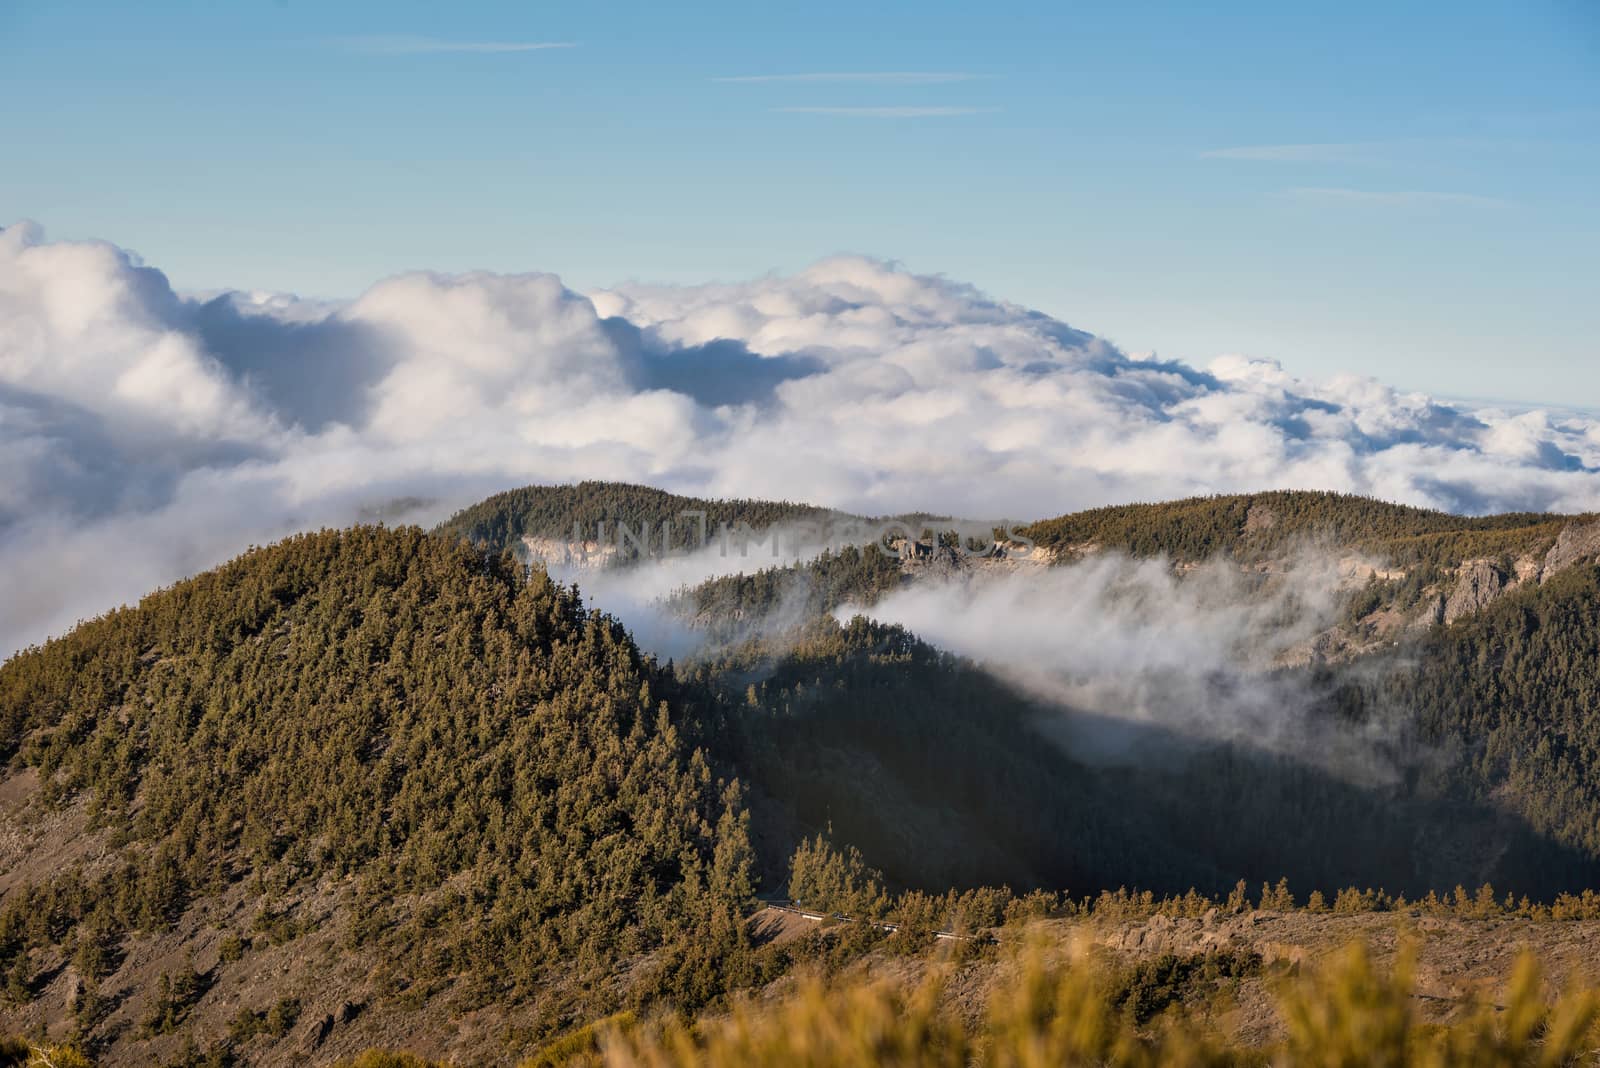 Sea of clouds in volcanic landscape of Teide national park, Tenerife, Canary islands, Spain. by HERRAEZ